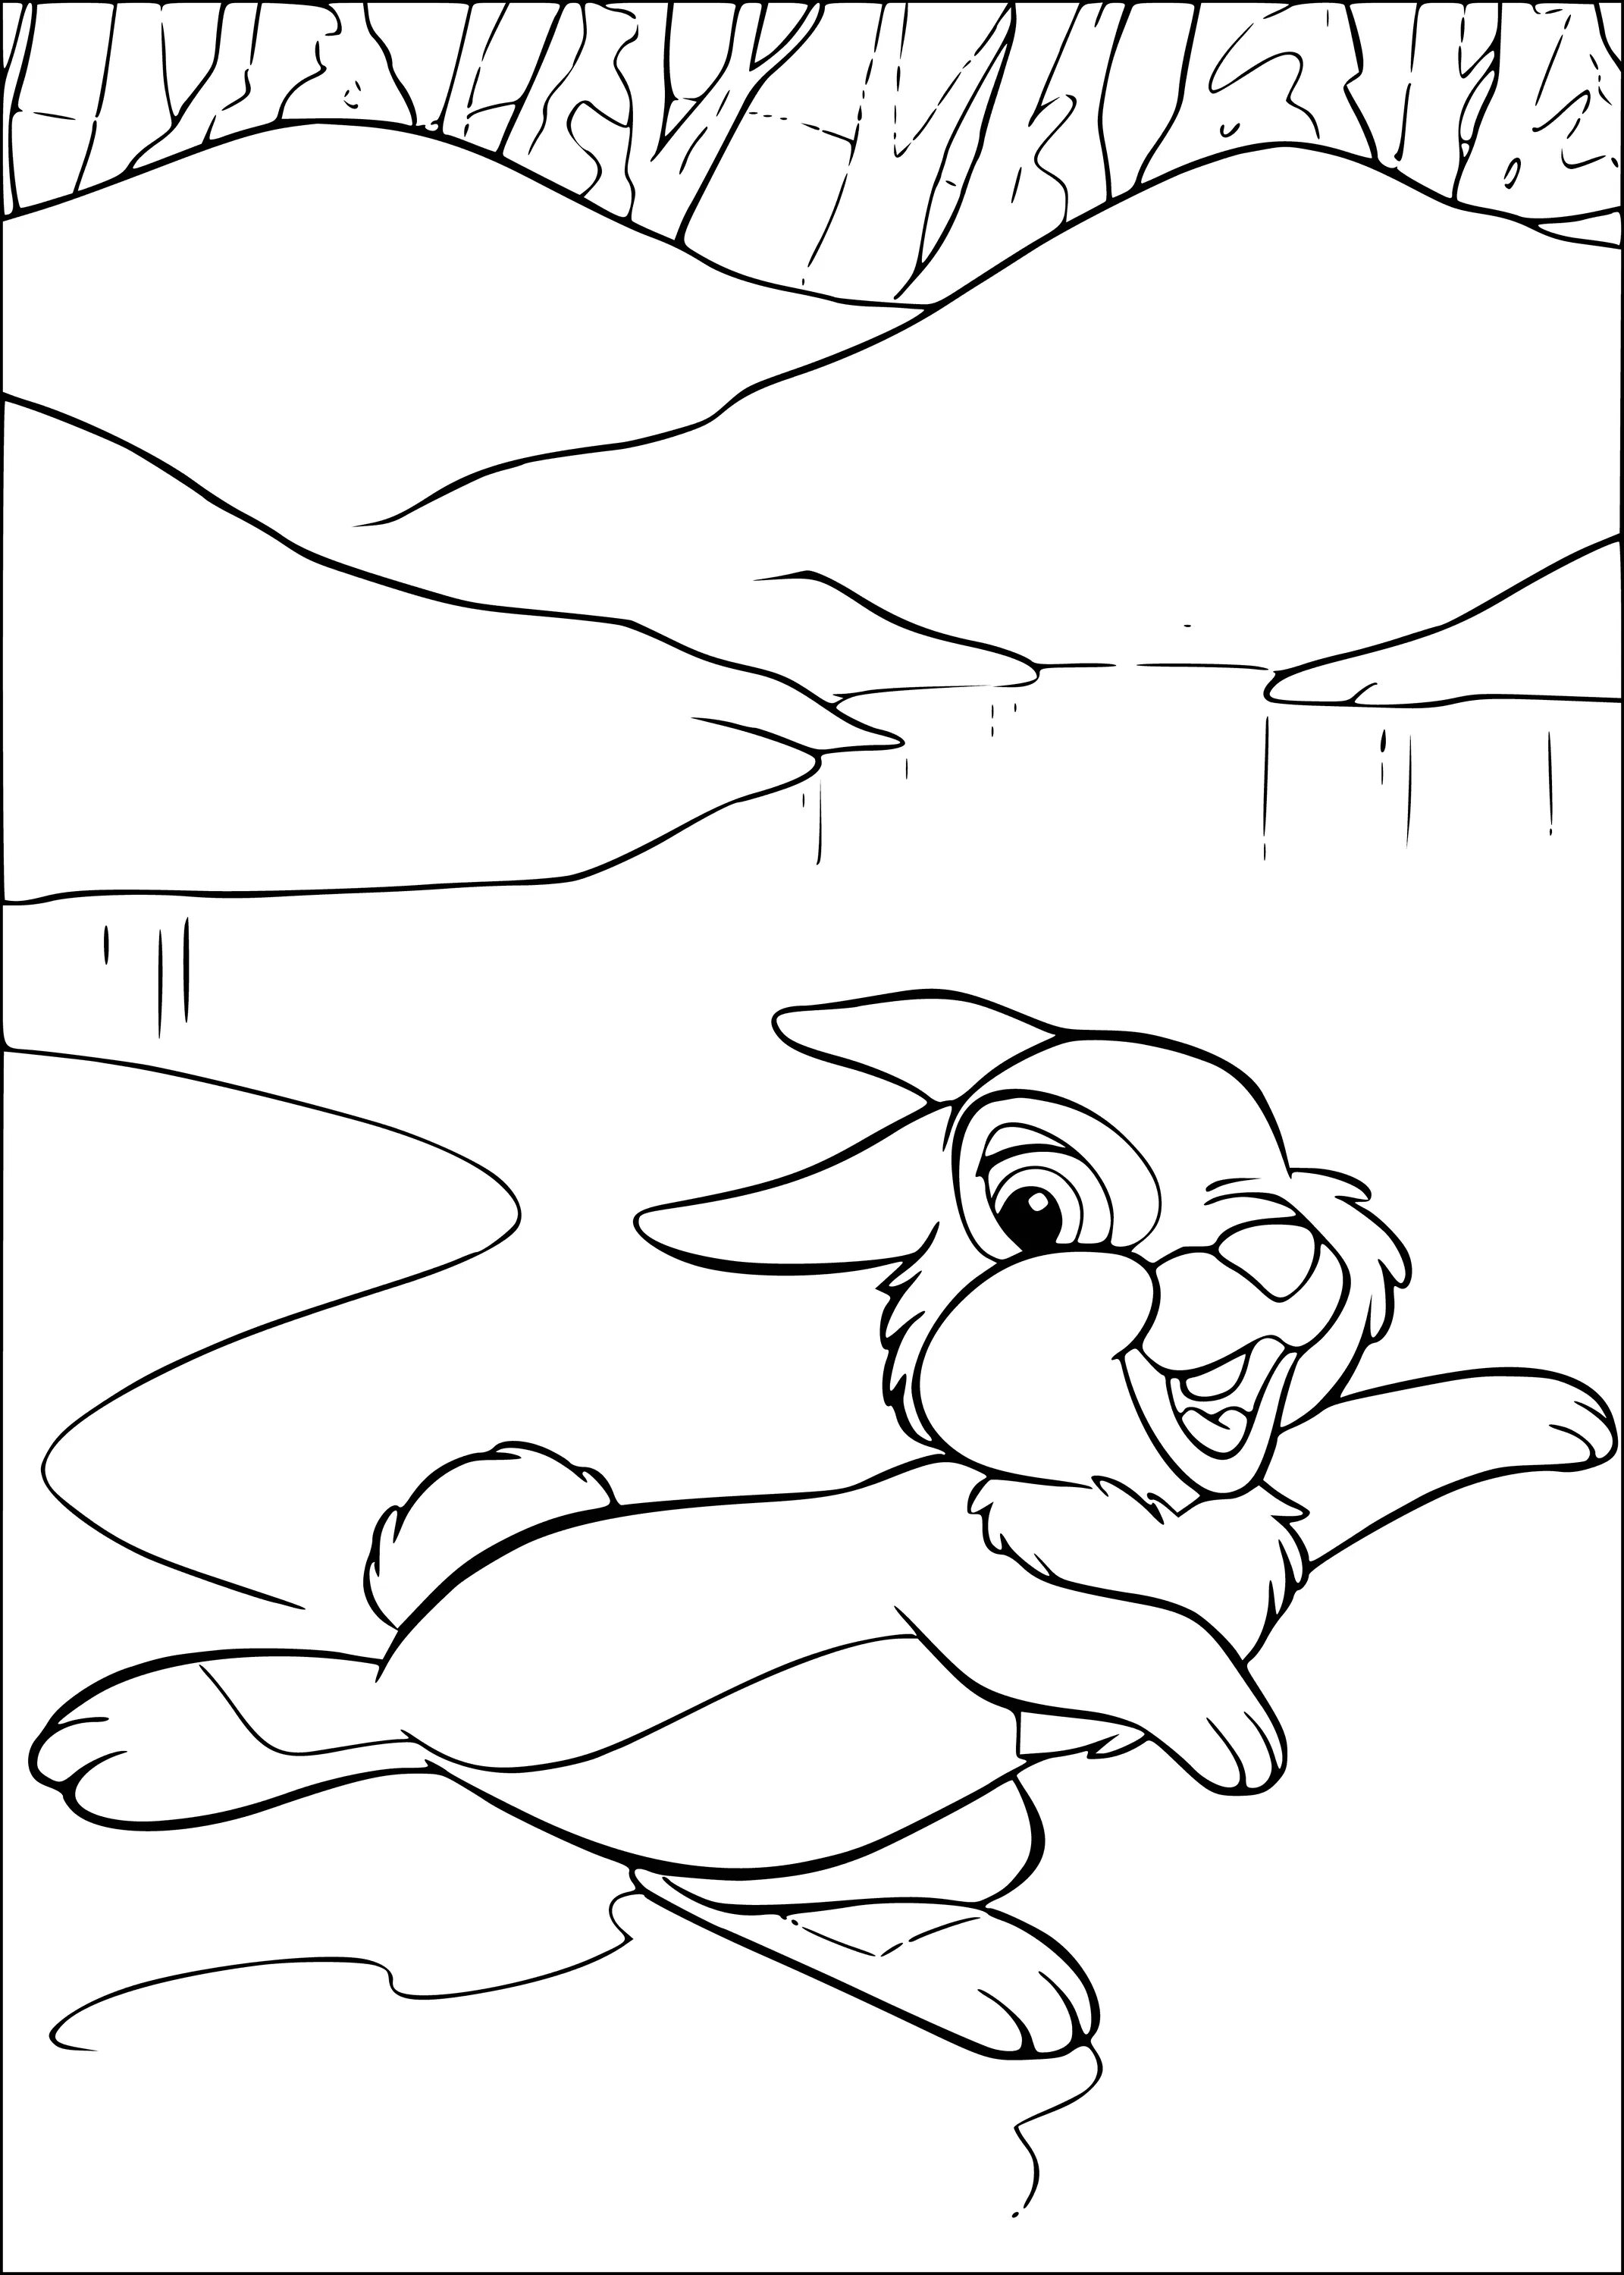 Vivacious coloring page hare из бэмби